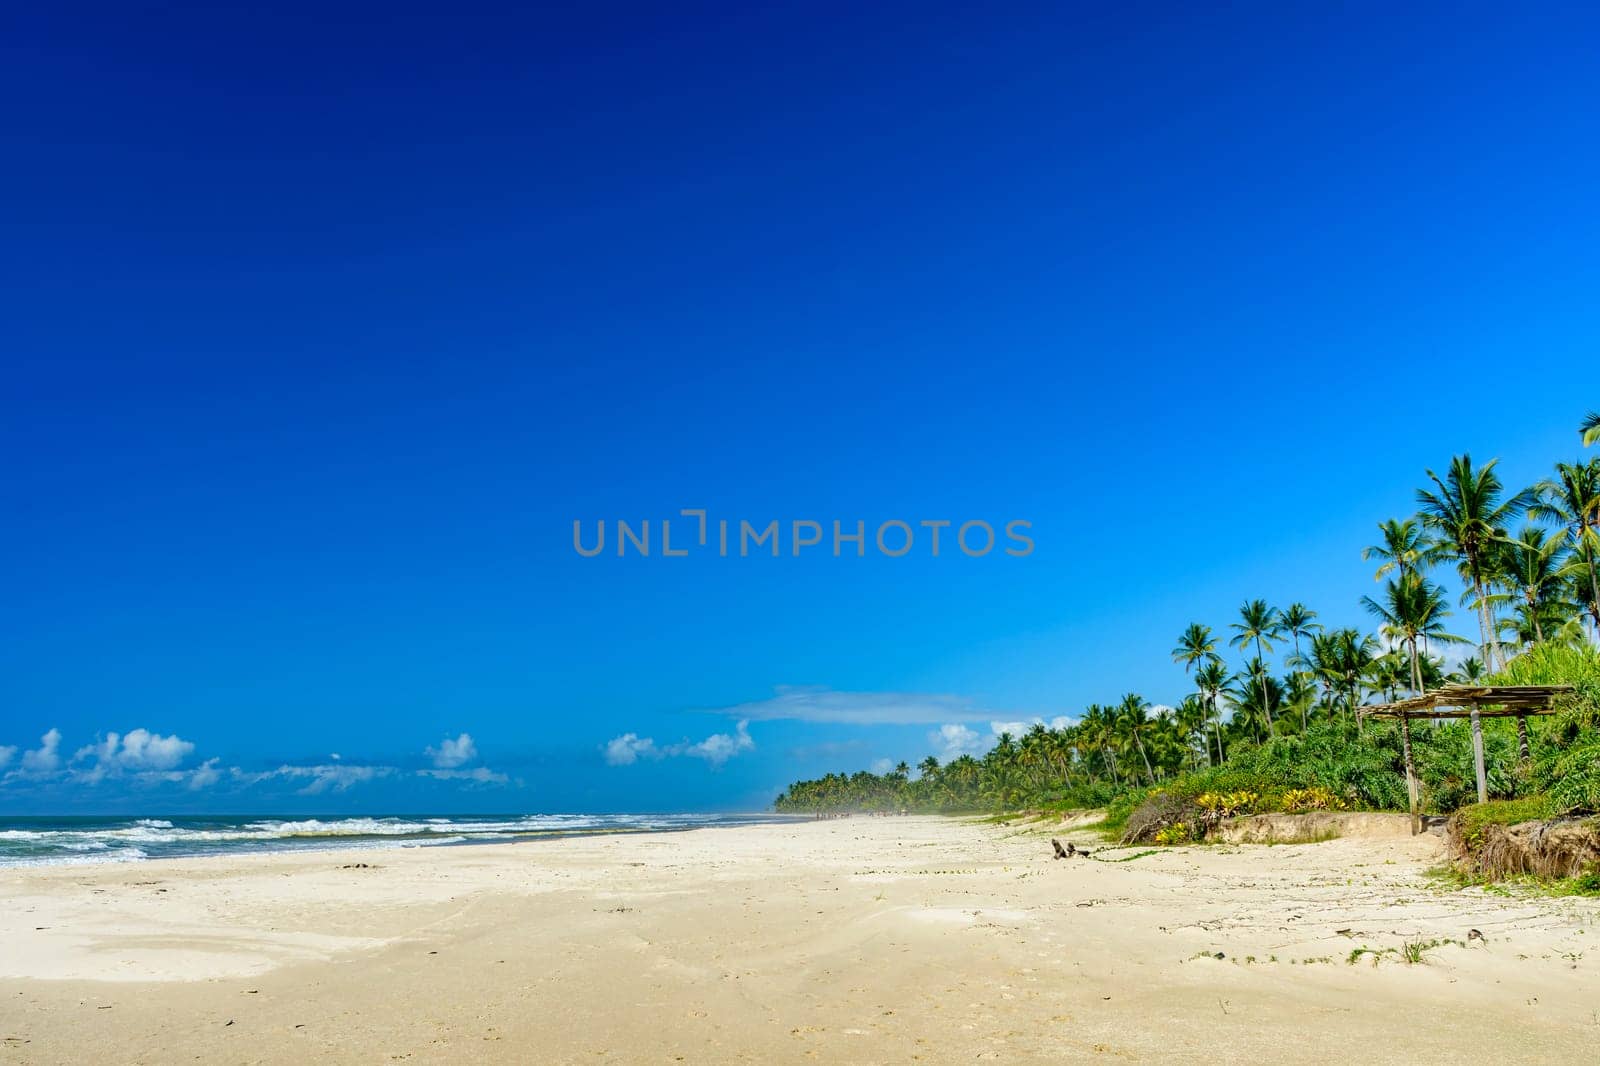 Stunning Sargi beach surrounded by the sea and coconut trees by Fred_Pinheiro